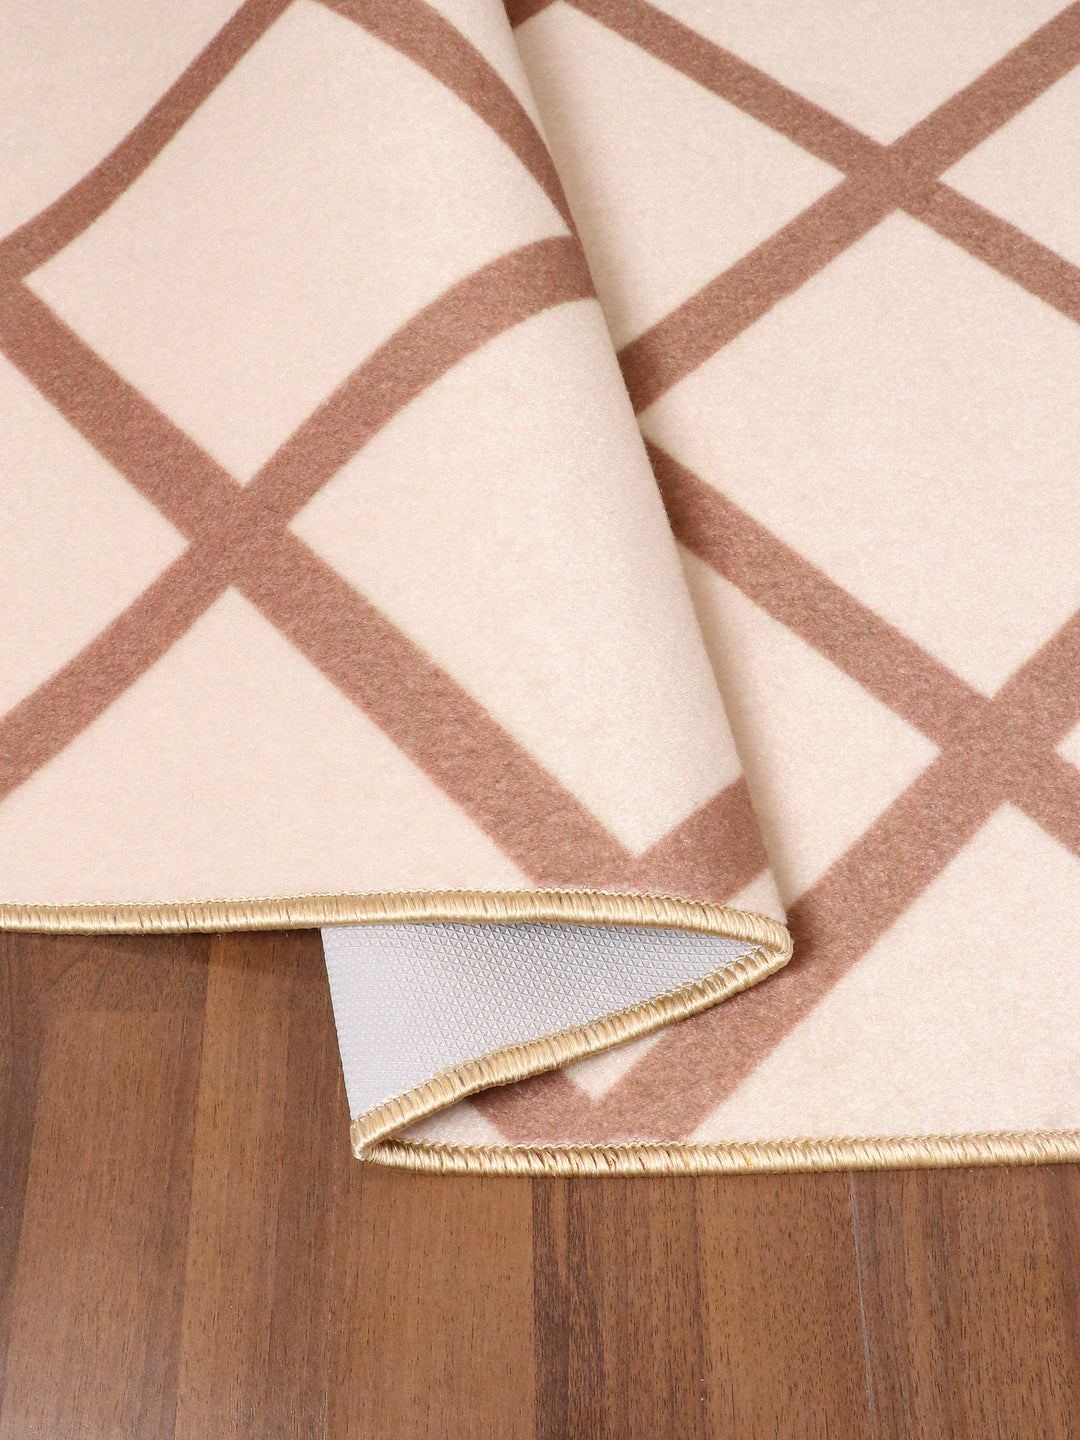 Brown Color Criss Cross Print Non Woven Runner with Non Slip TPR Backing